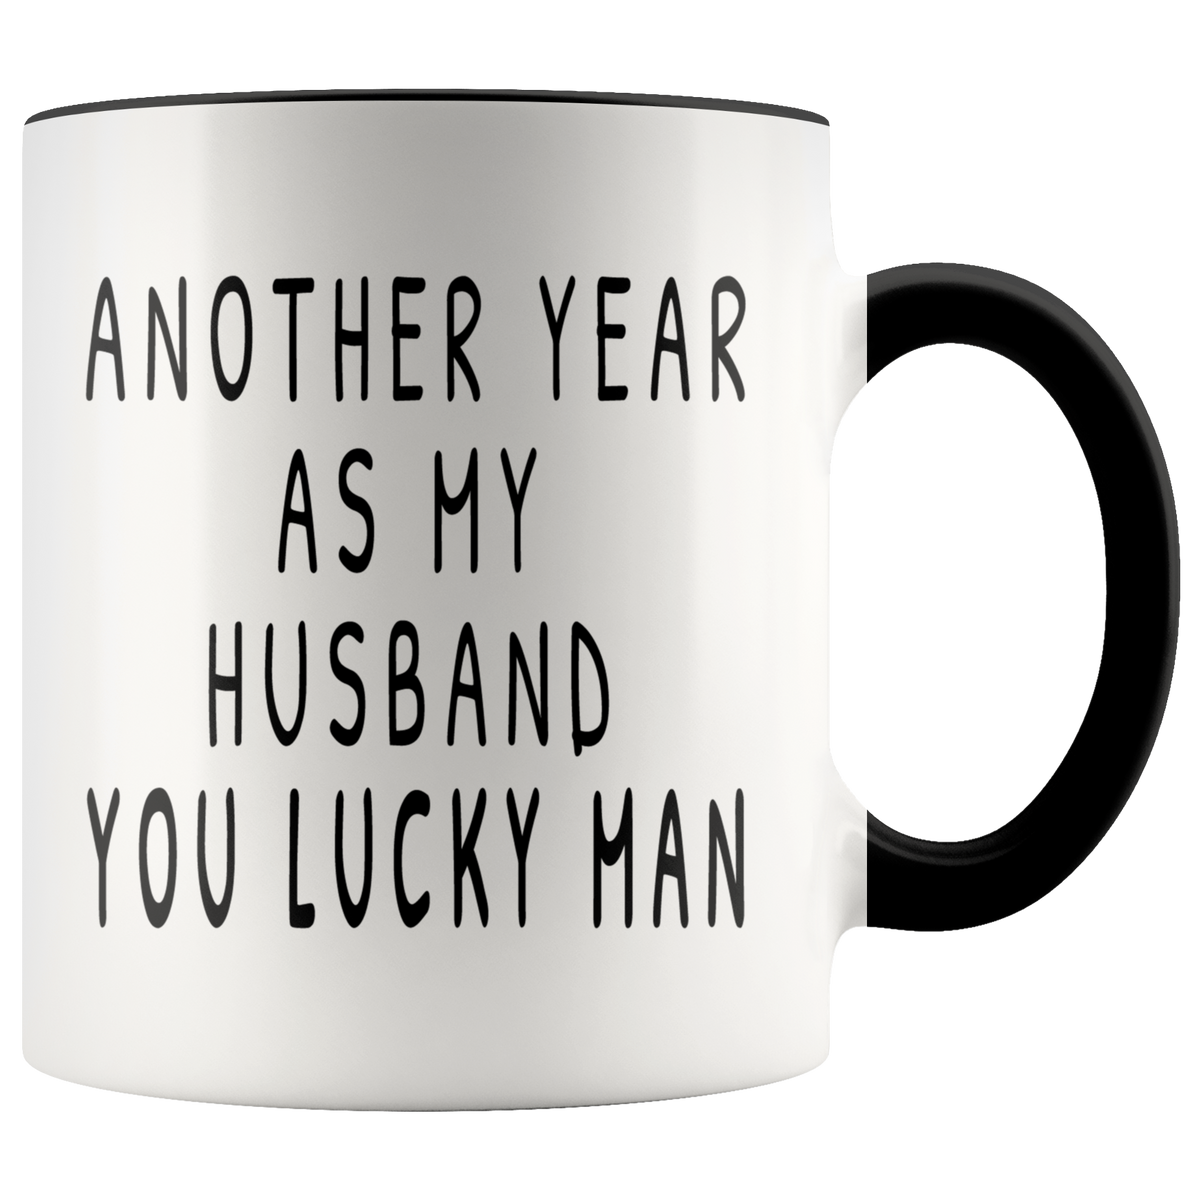 Funny Anniversary Gift For Him For Husband - Another Year As My Husband Accent Coffee Mug 11oz (black)